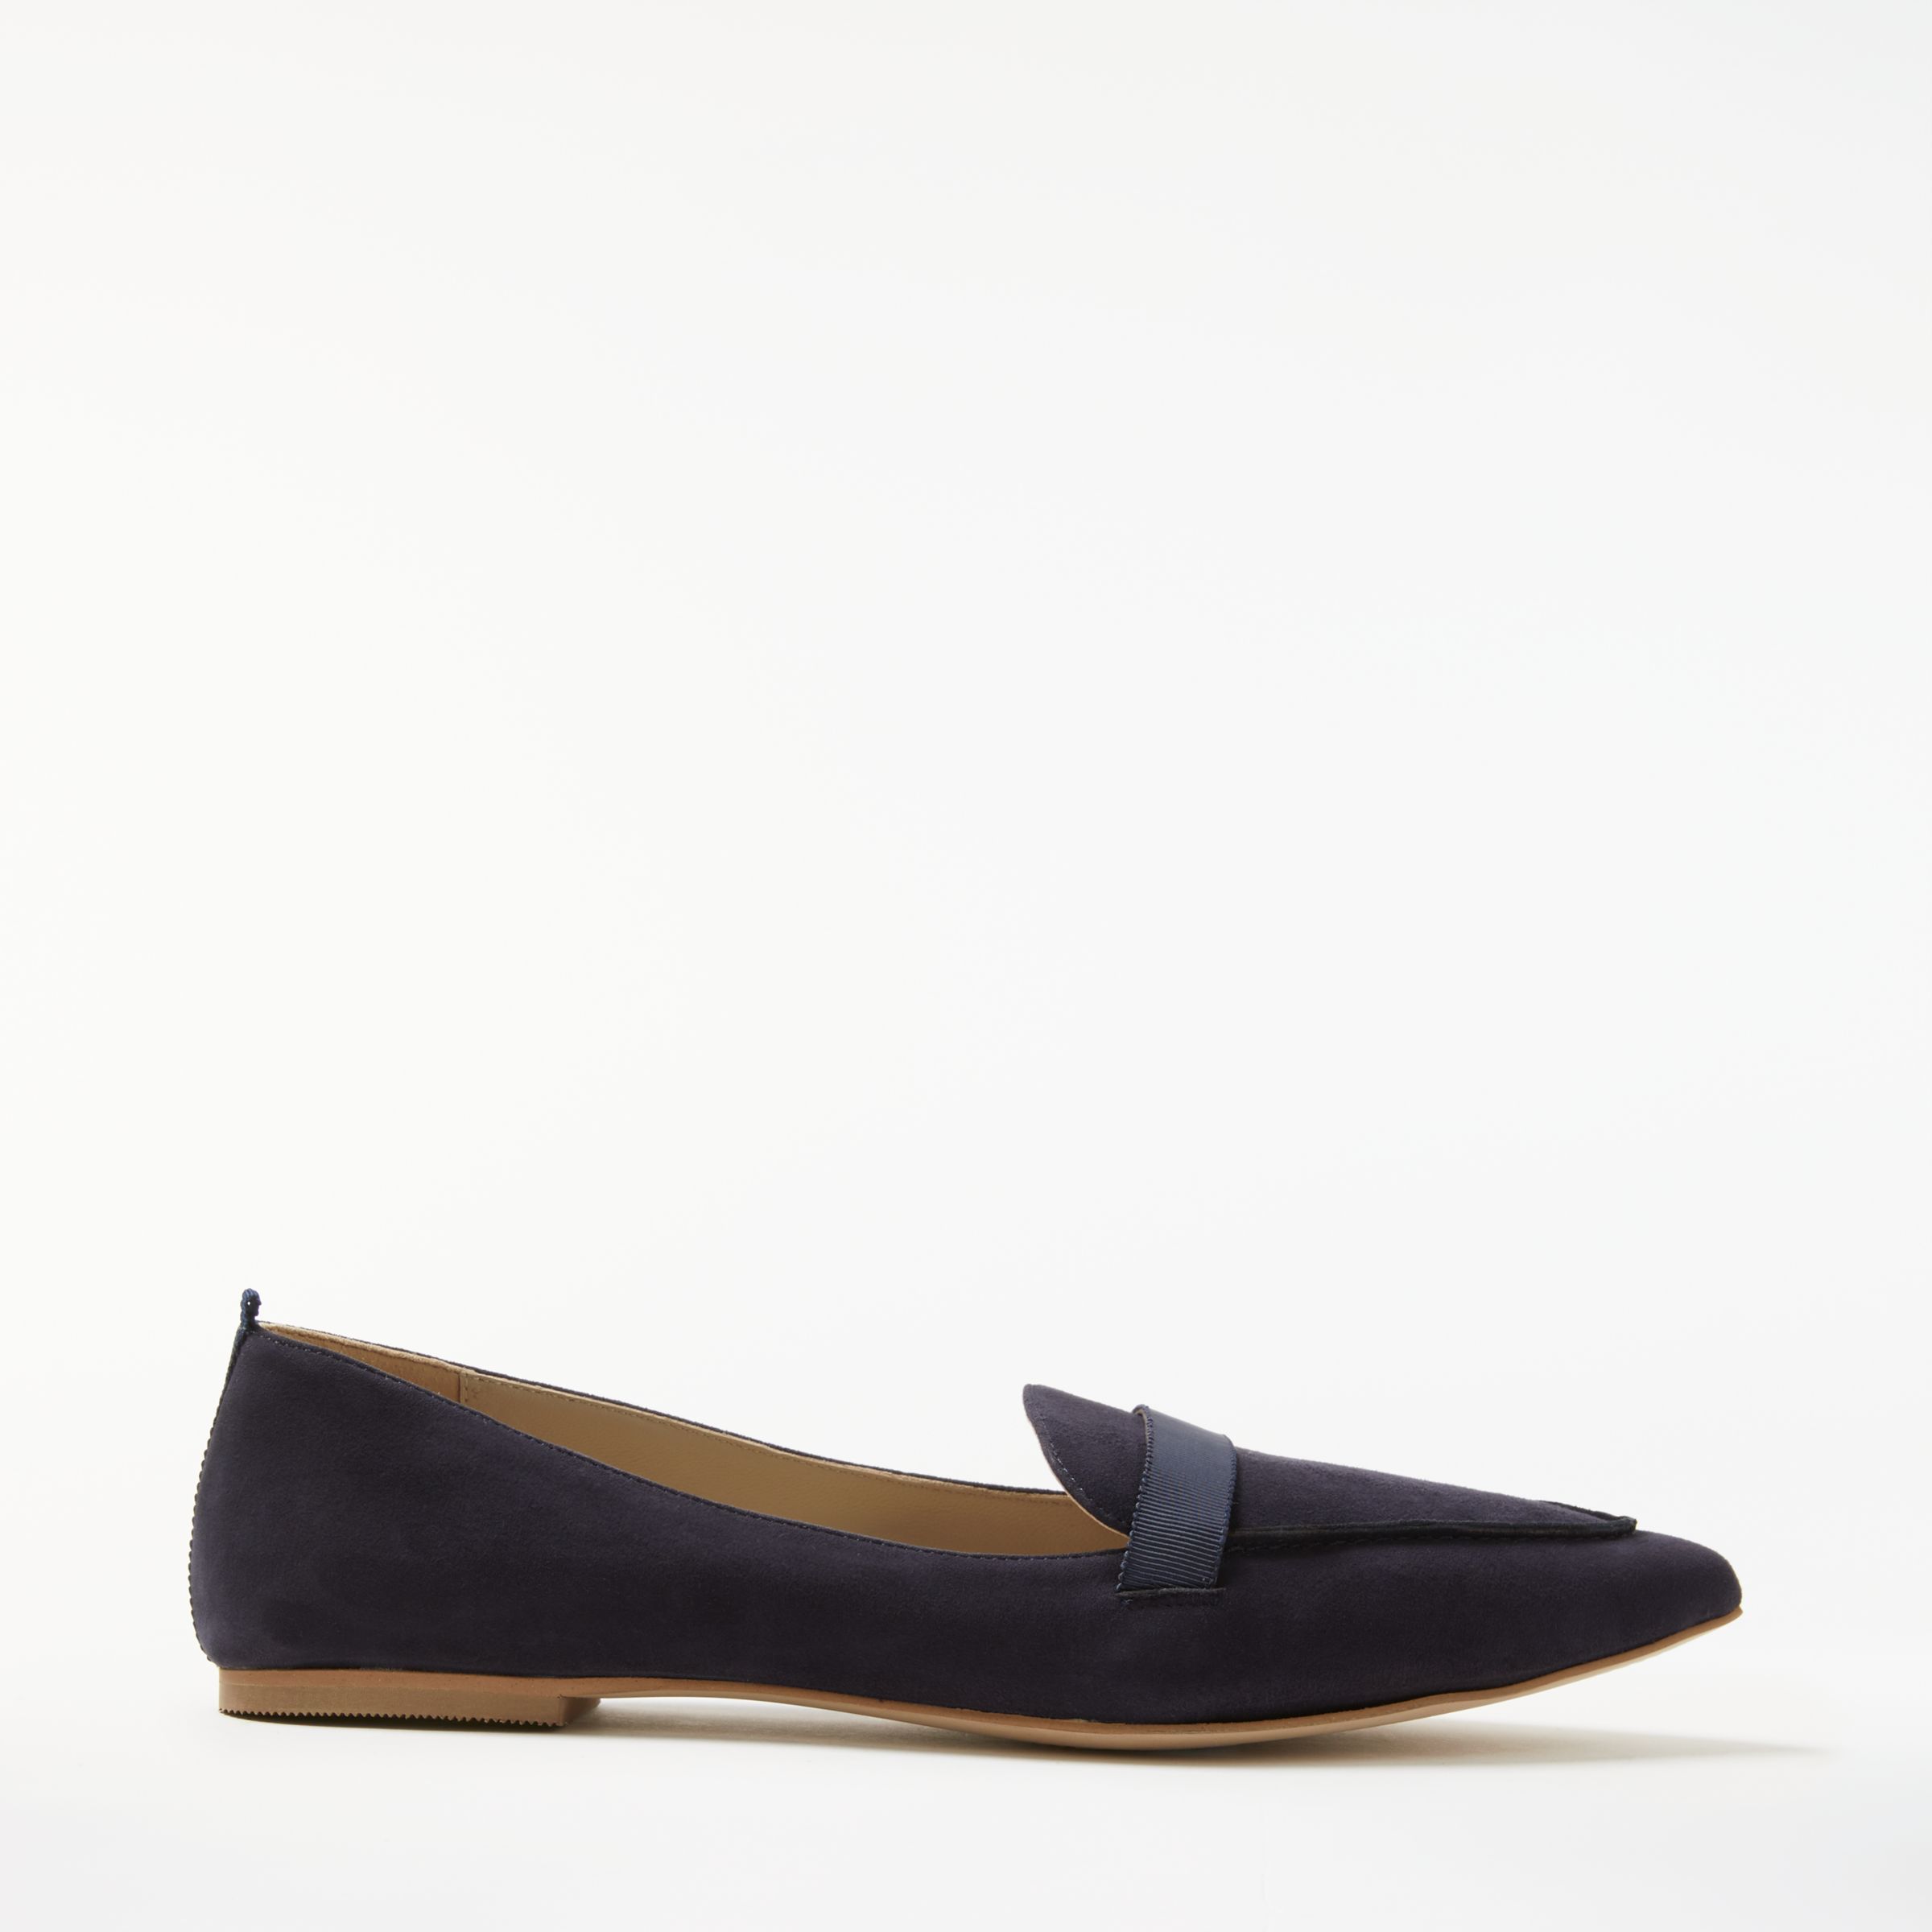 Boden Abbie Pointed Toe Loafers